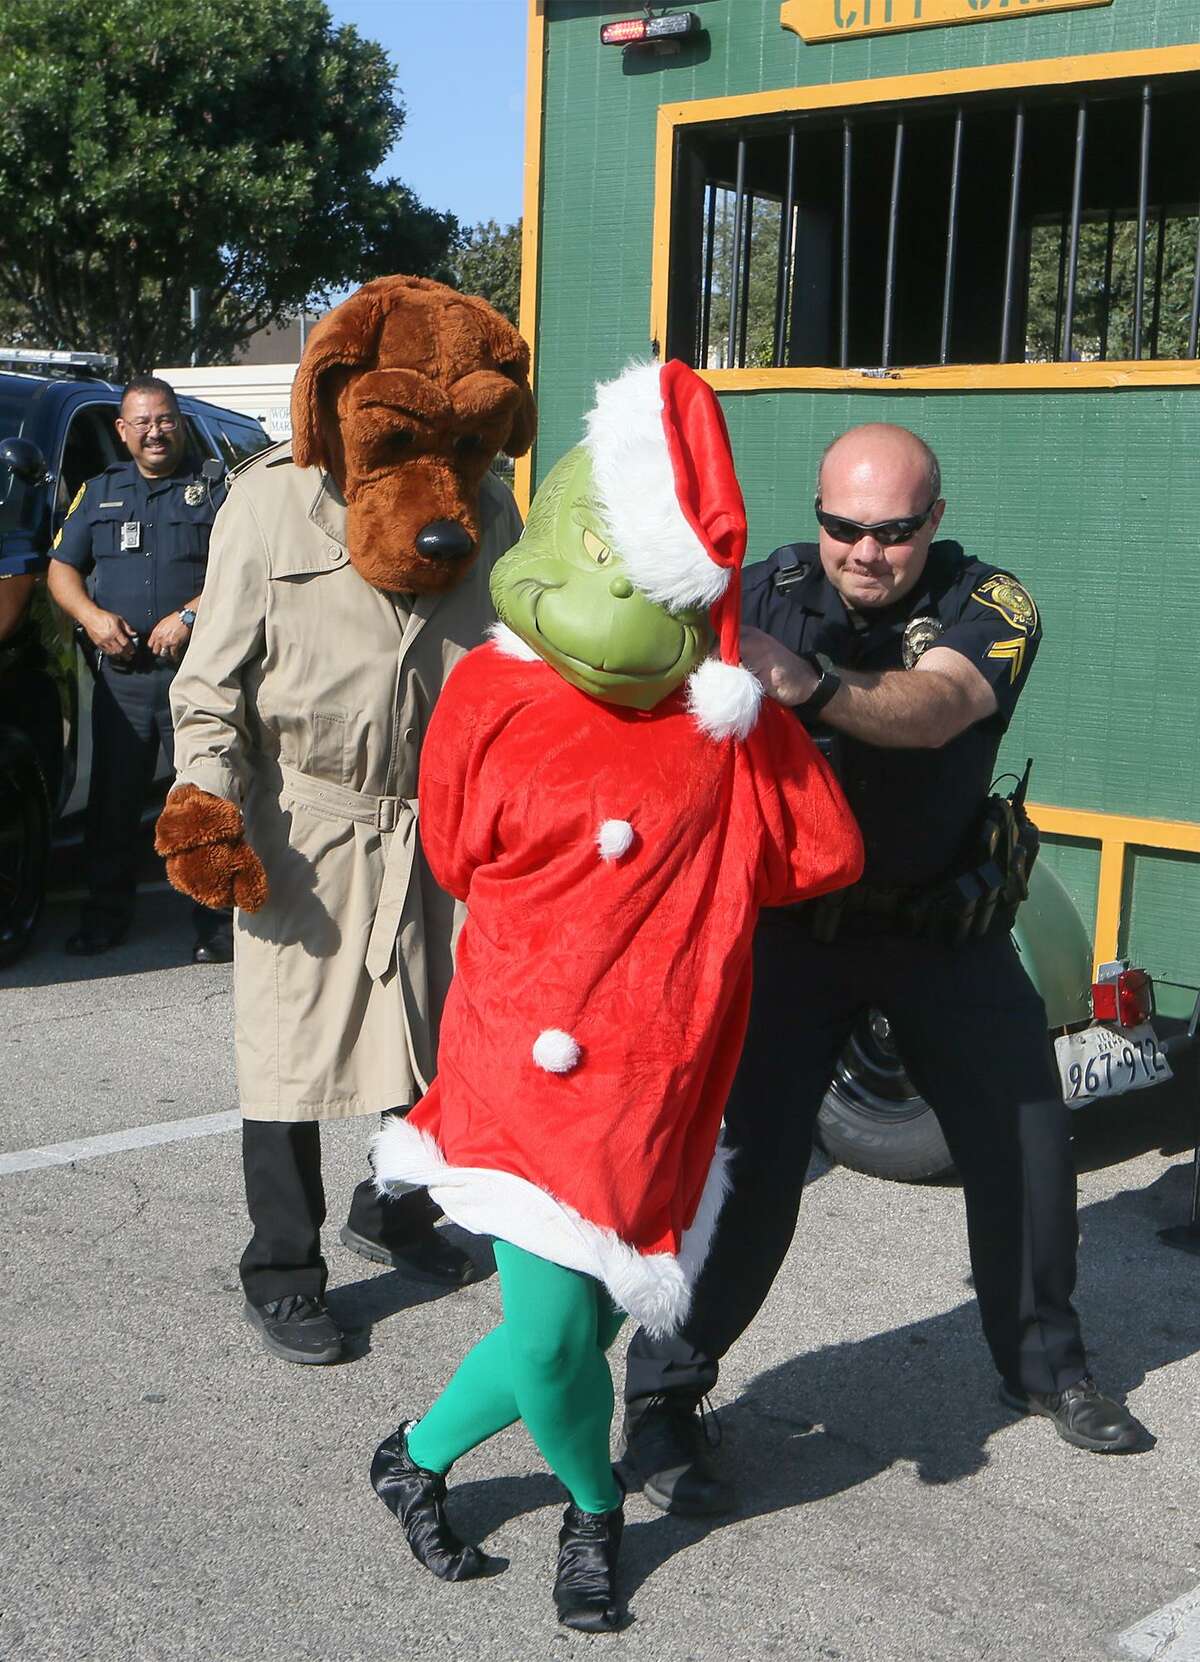 Operation Grinch' aims to warn holiday criminals